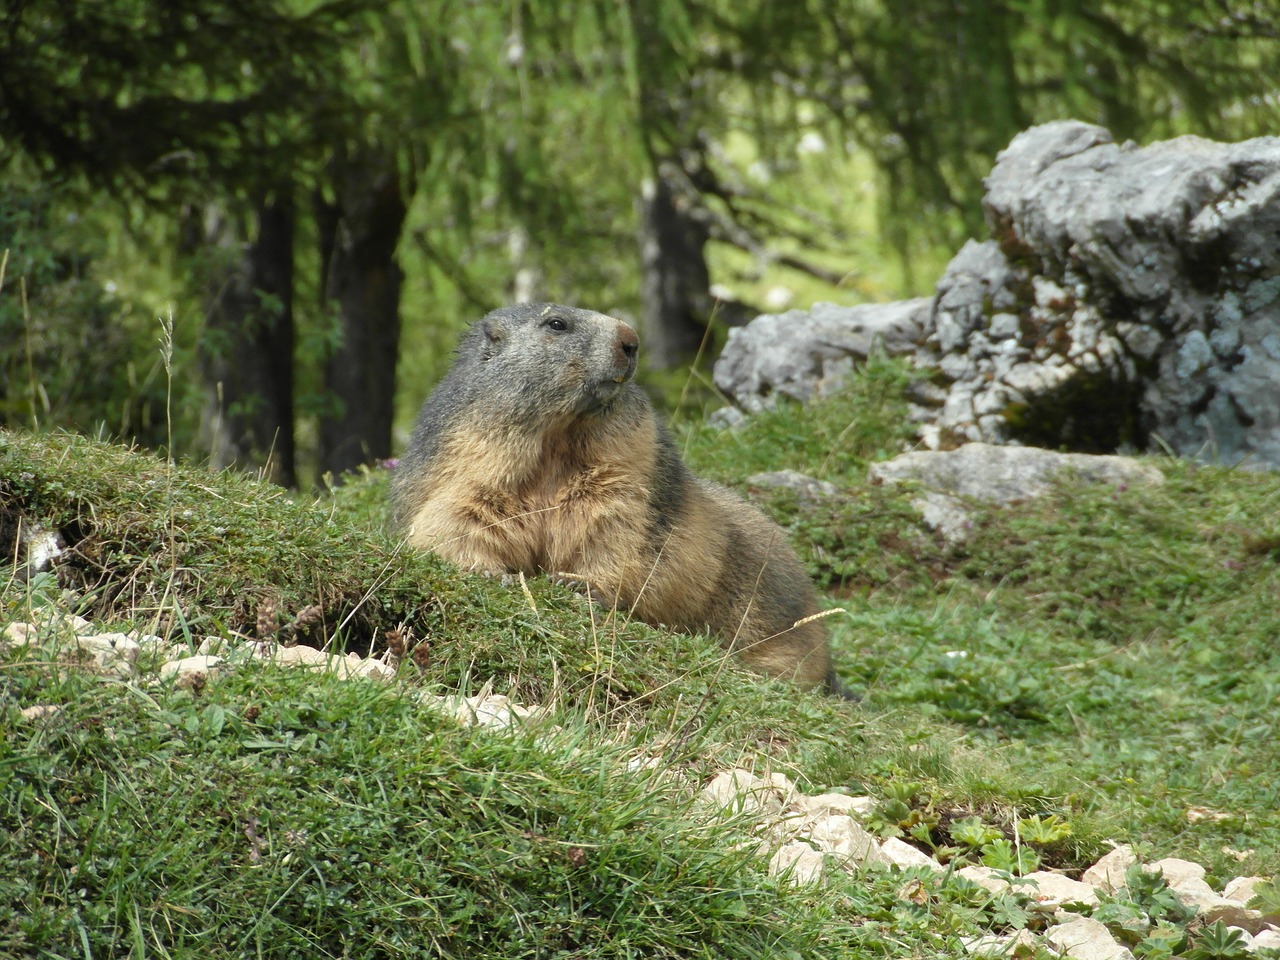 Be quiet and respectful and you may spot an alpine animal like a Marmot 